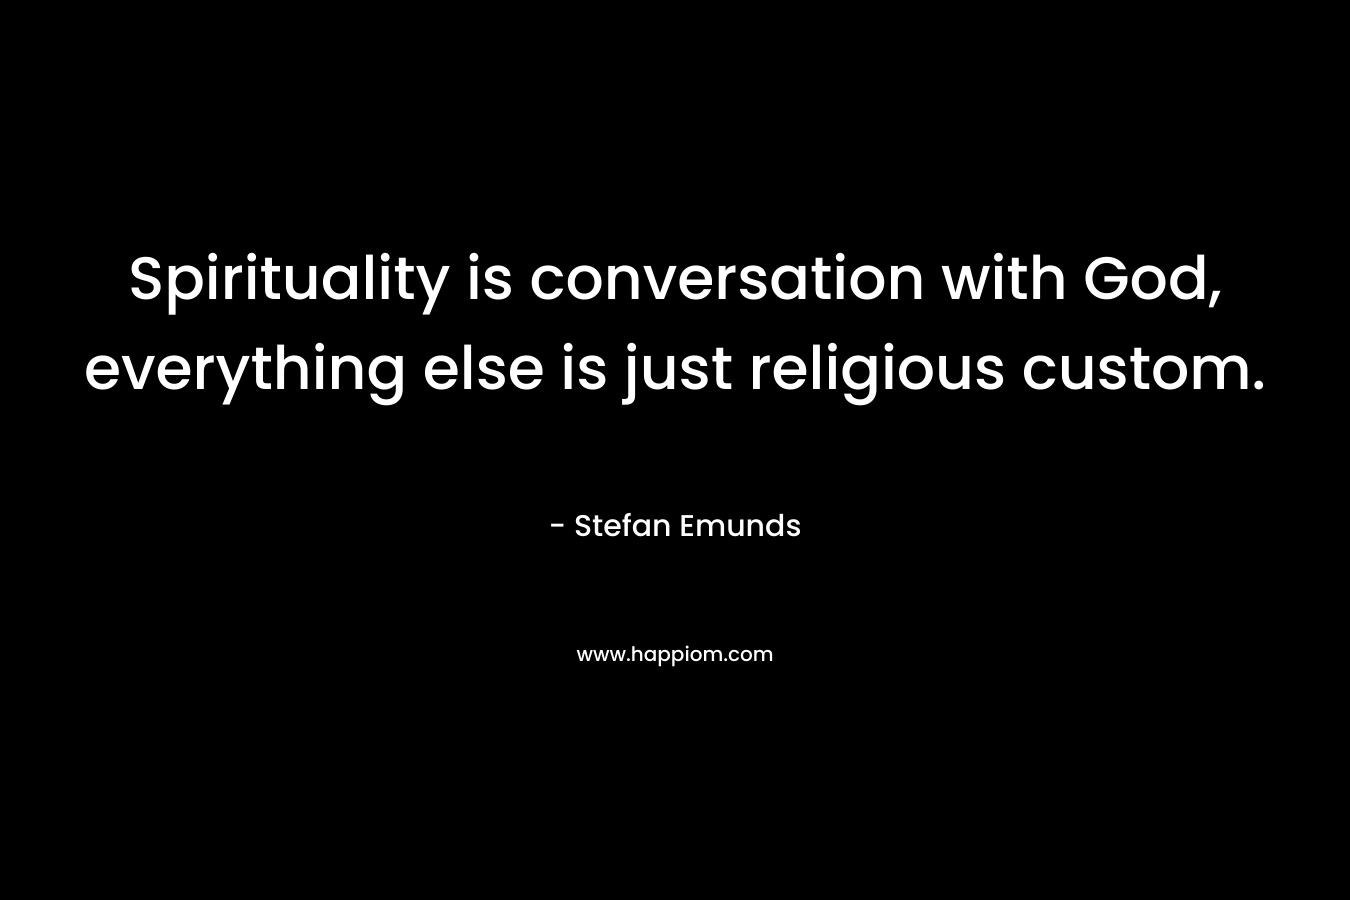 Spirituality is conversation with God, everything else is just religious custom. – Stefan Emunds